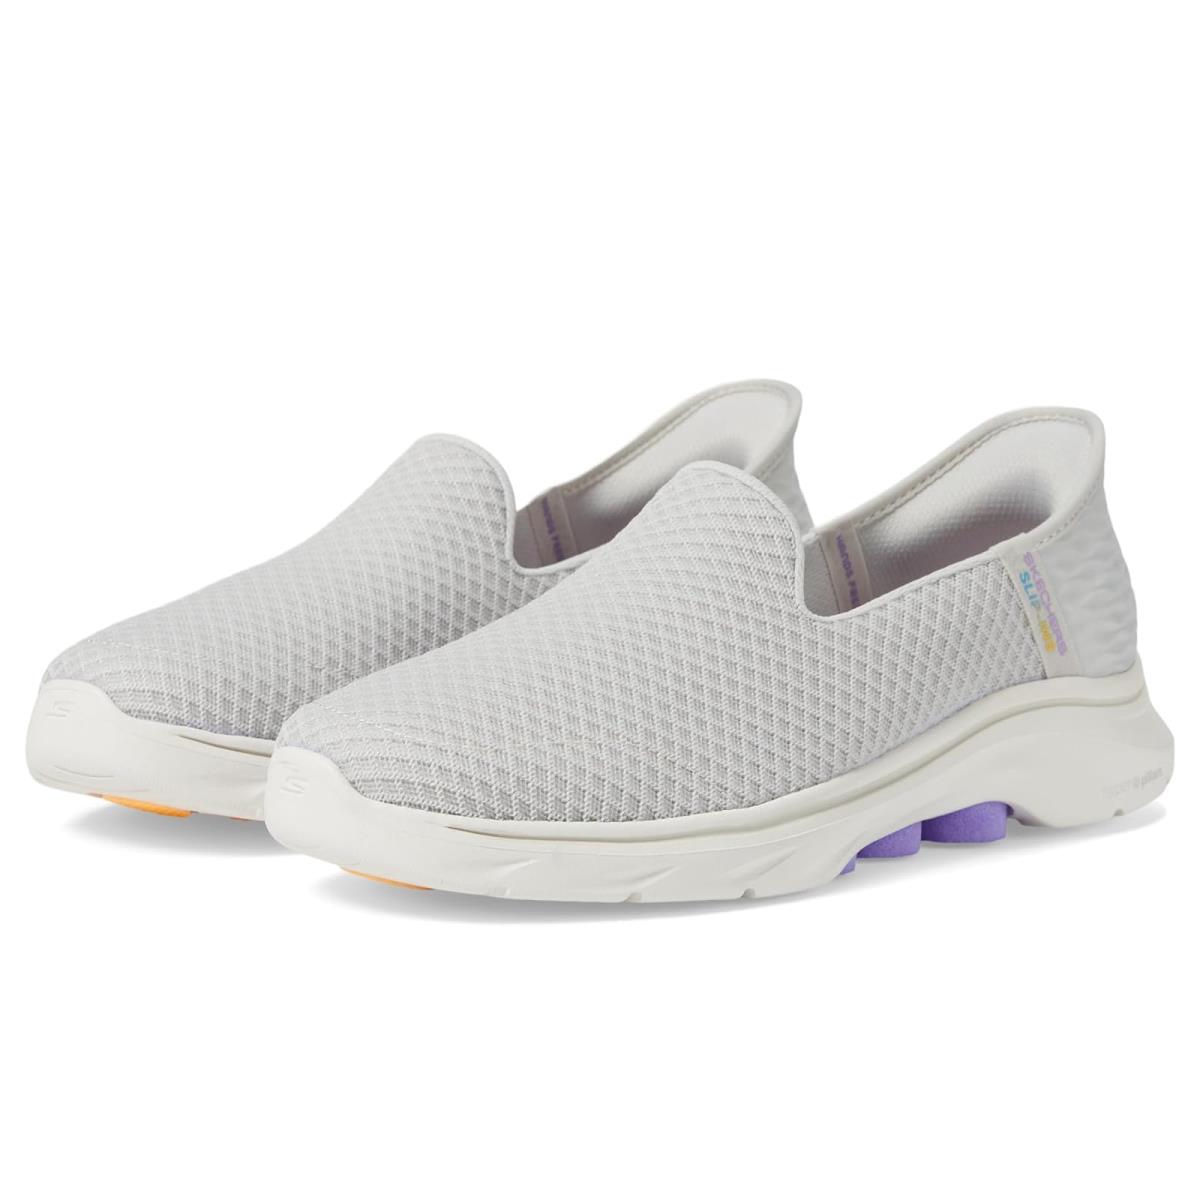 Woman`s Shoes Skechers Performance Go Walk 7 Daley Hands Free Slip-ins Gray/Lavender